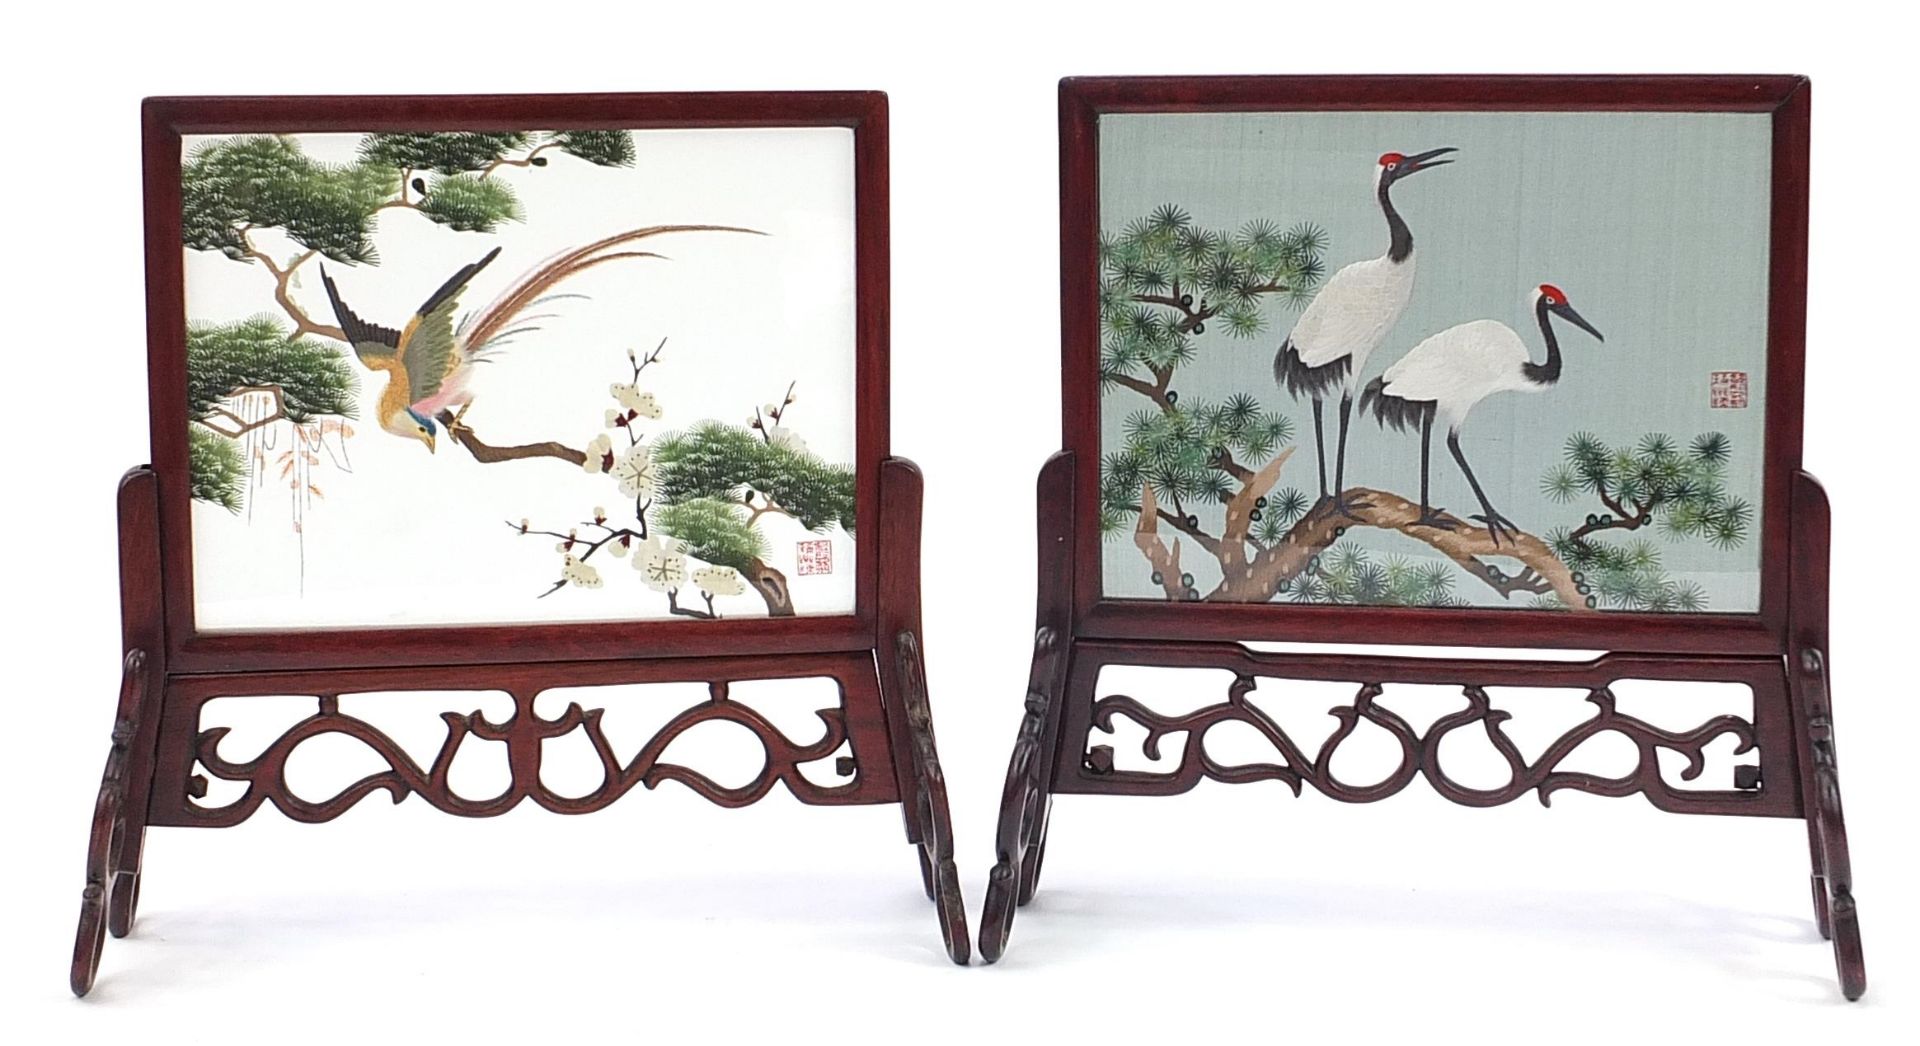 Pair of Chinese hardwood table screens with silk panels finely embroidered with birds of paradise - Image 2 of 4